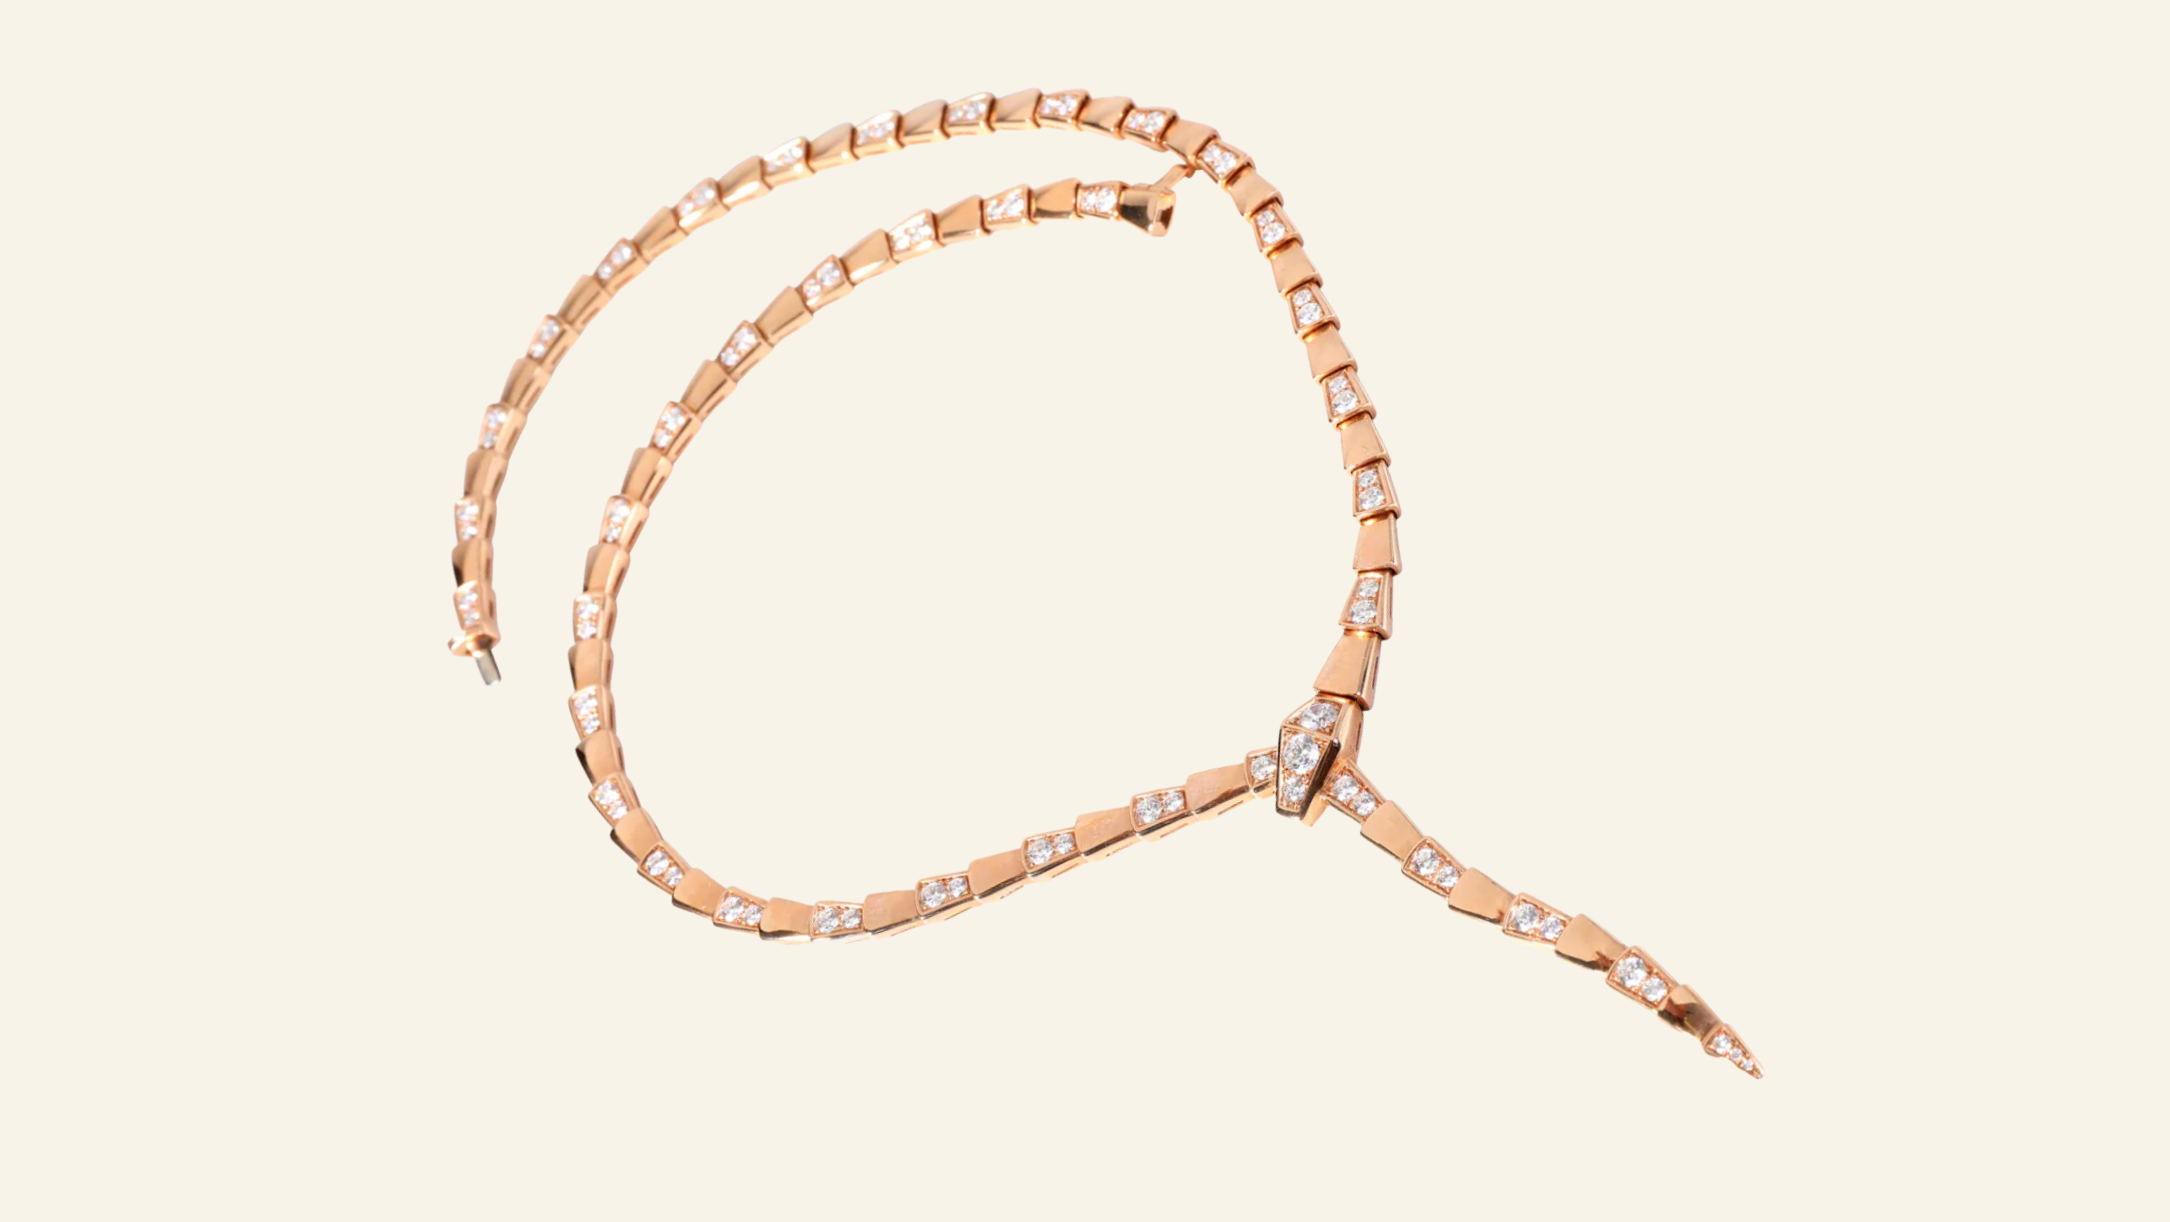 How Much Is The Bulgari Serpenti Necklace? | myGemma